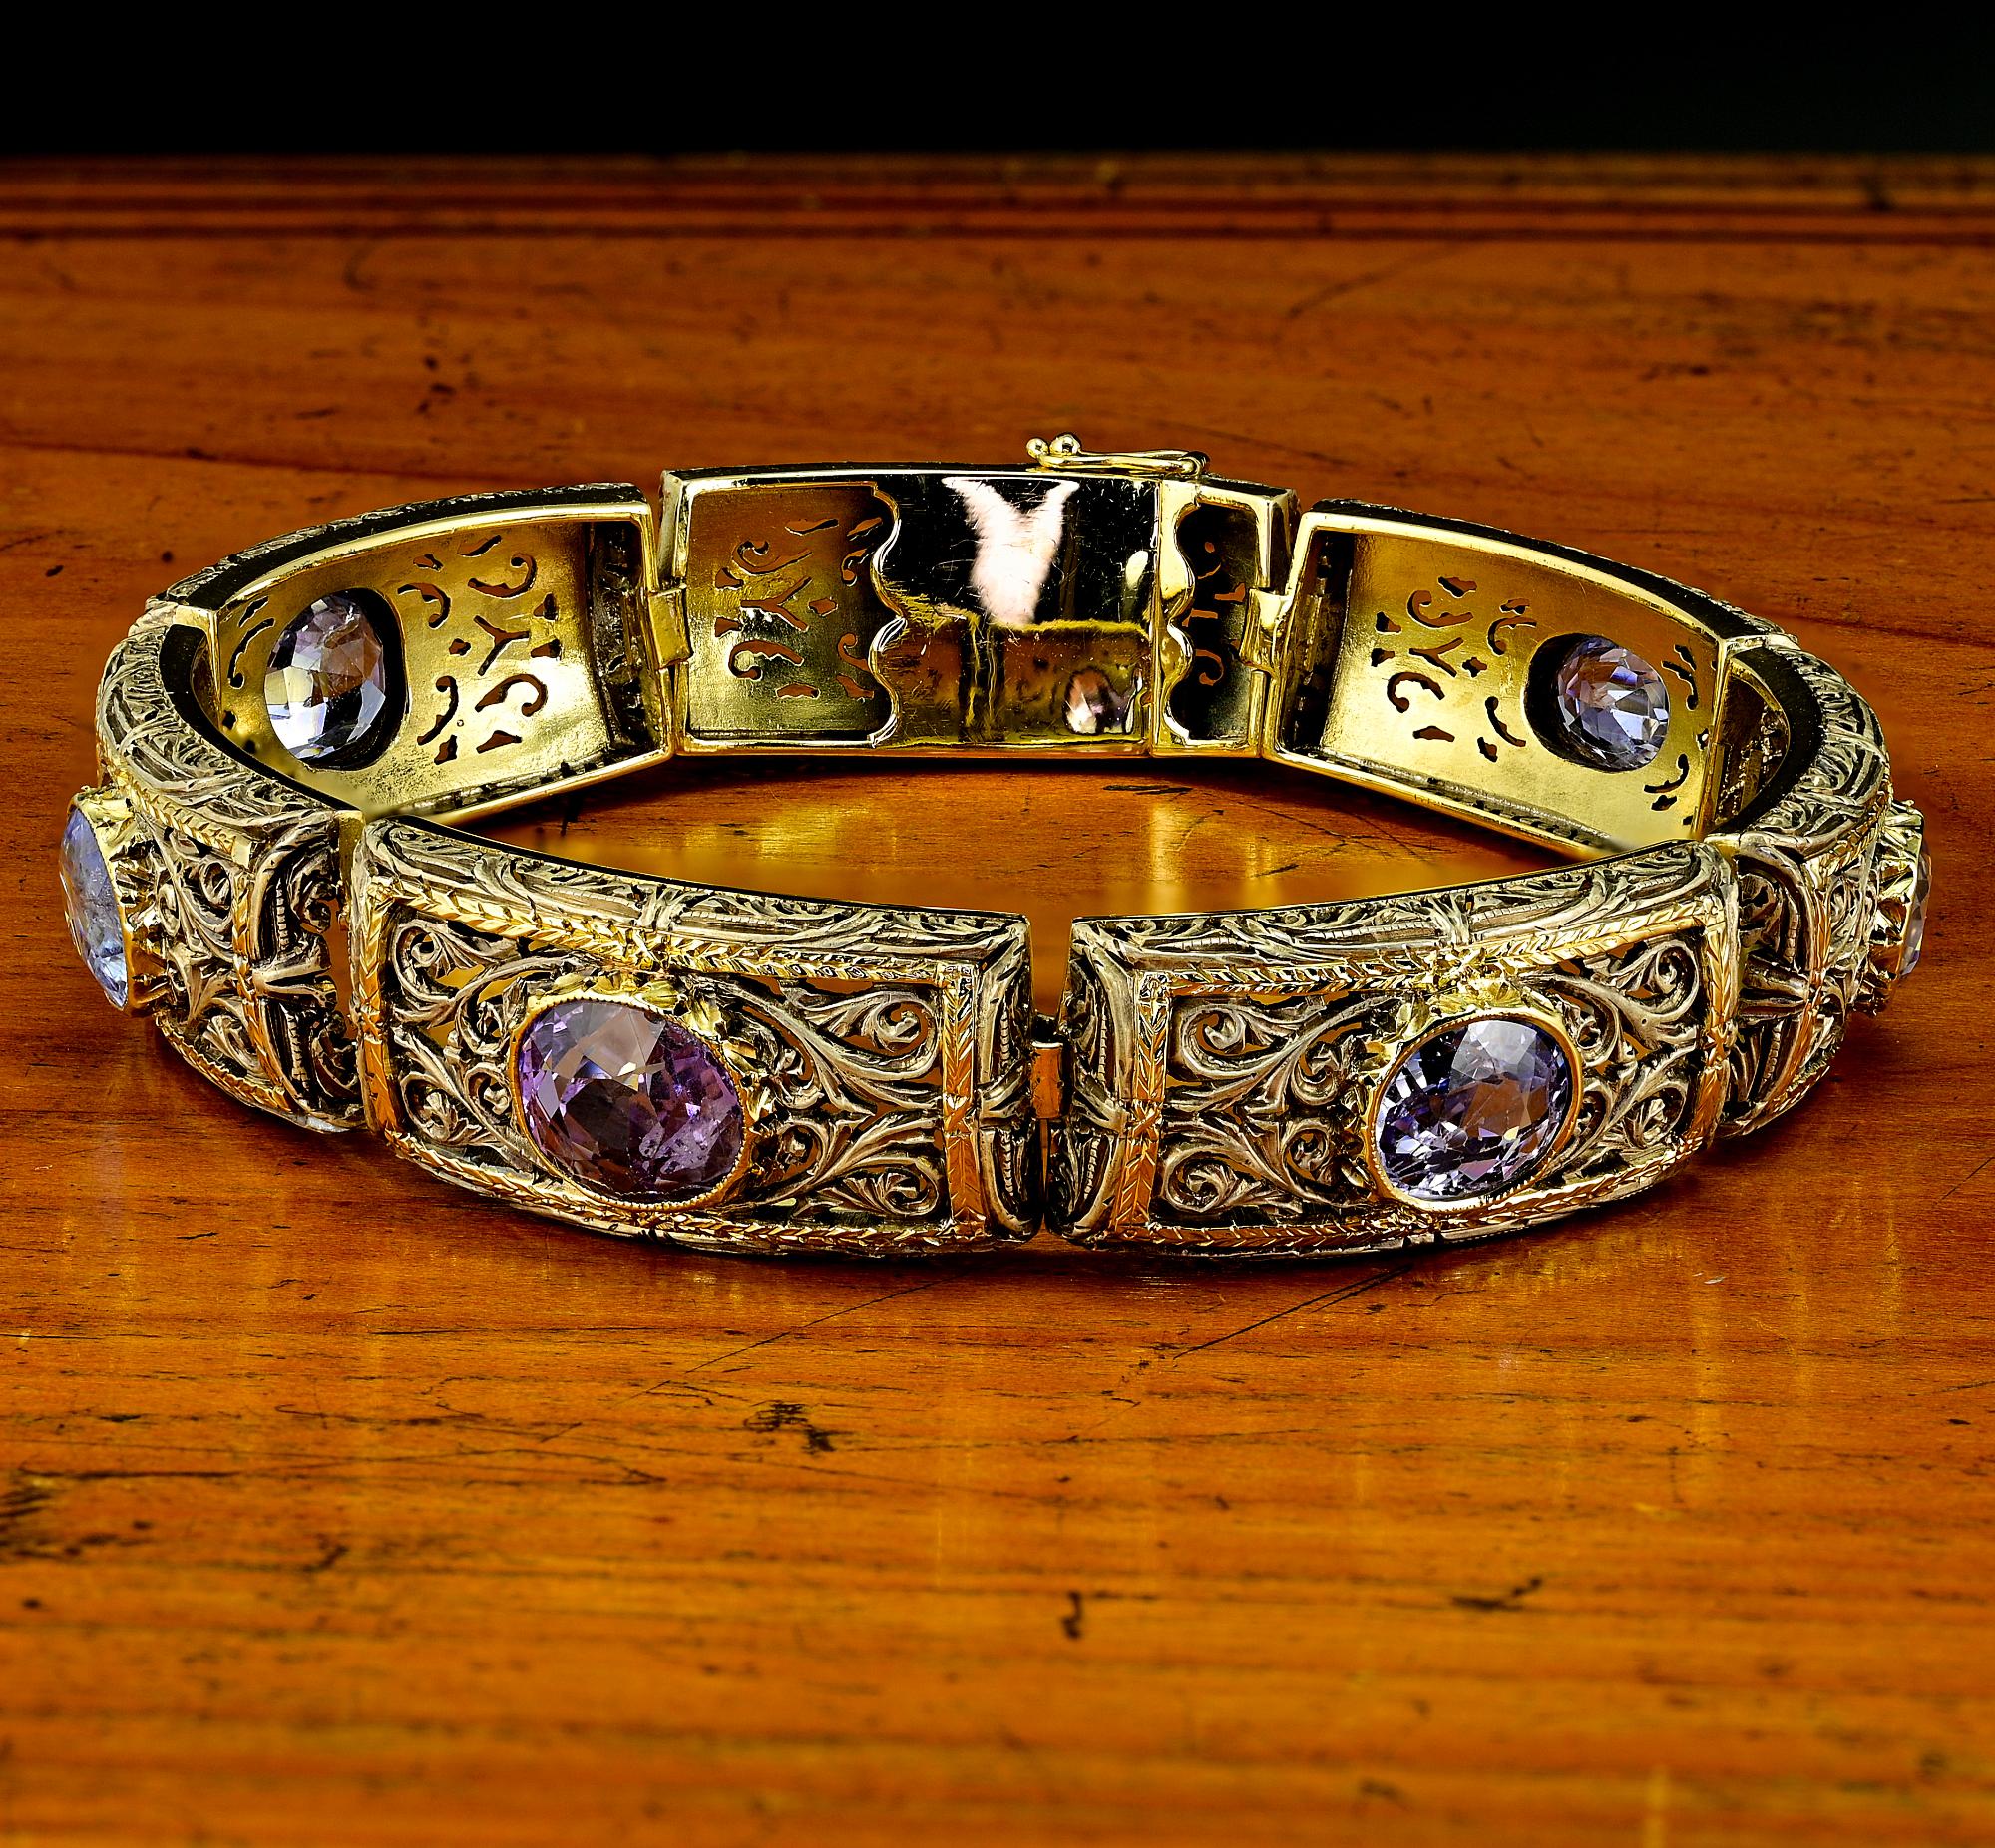 This outstanding antique bracelet is 1930 circa – 18 KT solid gold topped by silver
Elegant workmanship artful rendered in fine panels with arabesque and floral motifs skilfully carved on silver upon
Adorned with a selection of 7 natural untreated